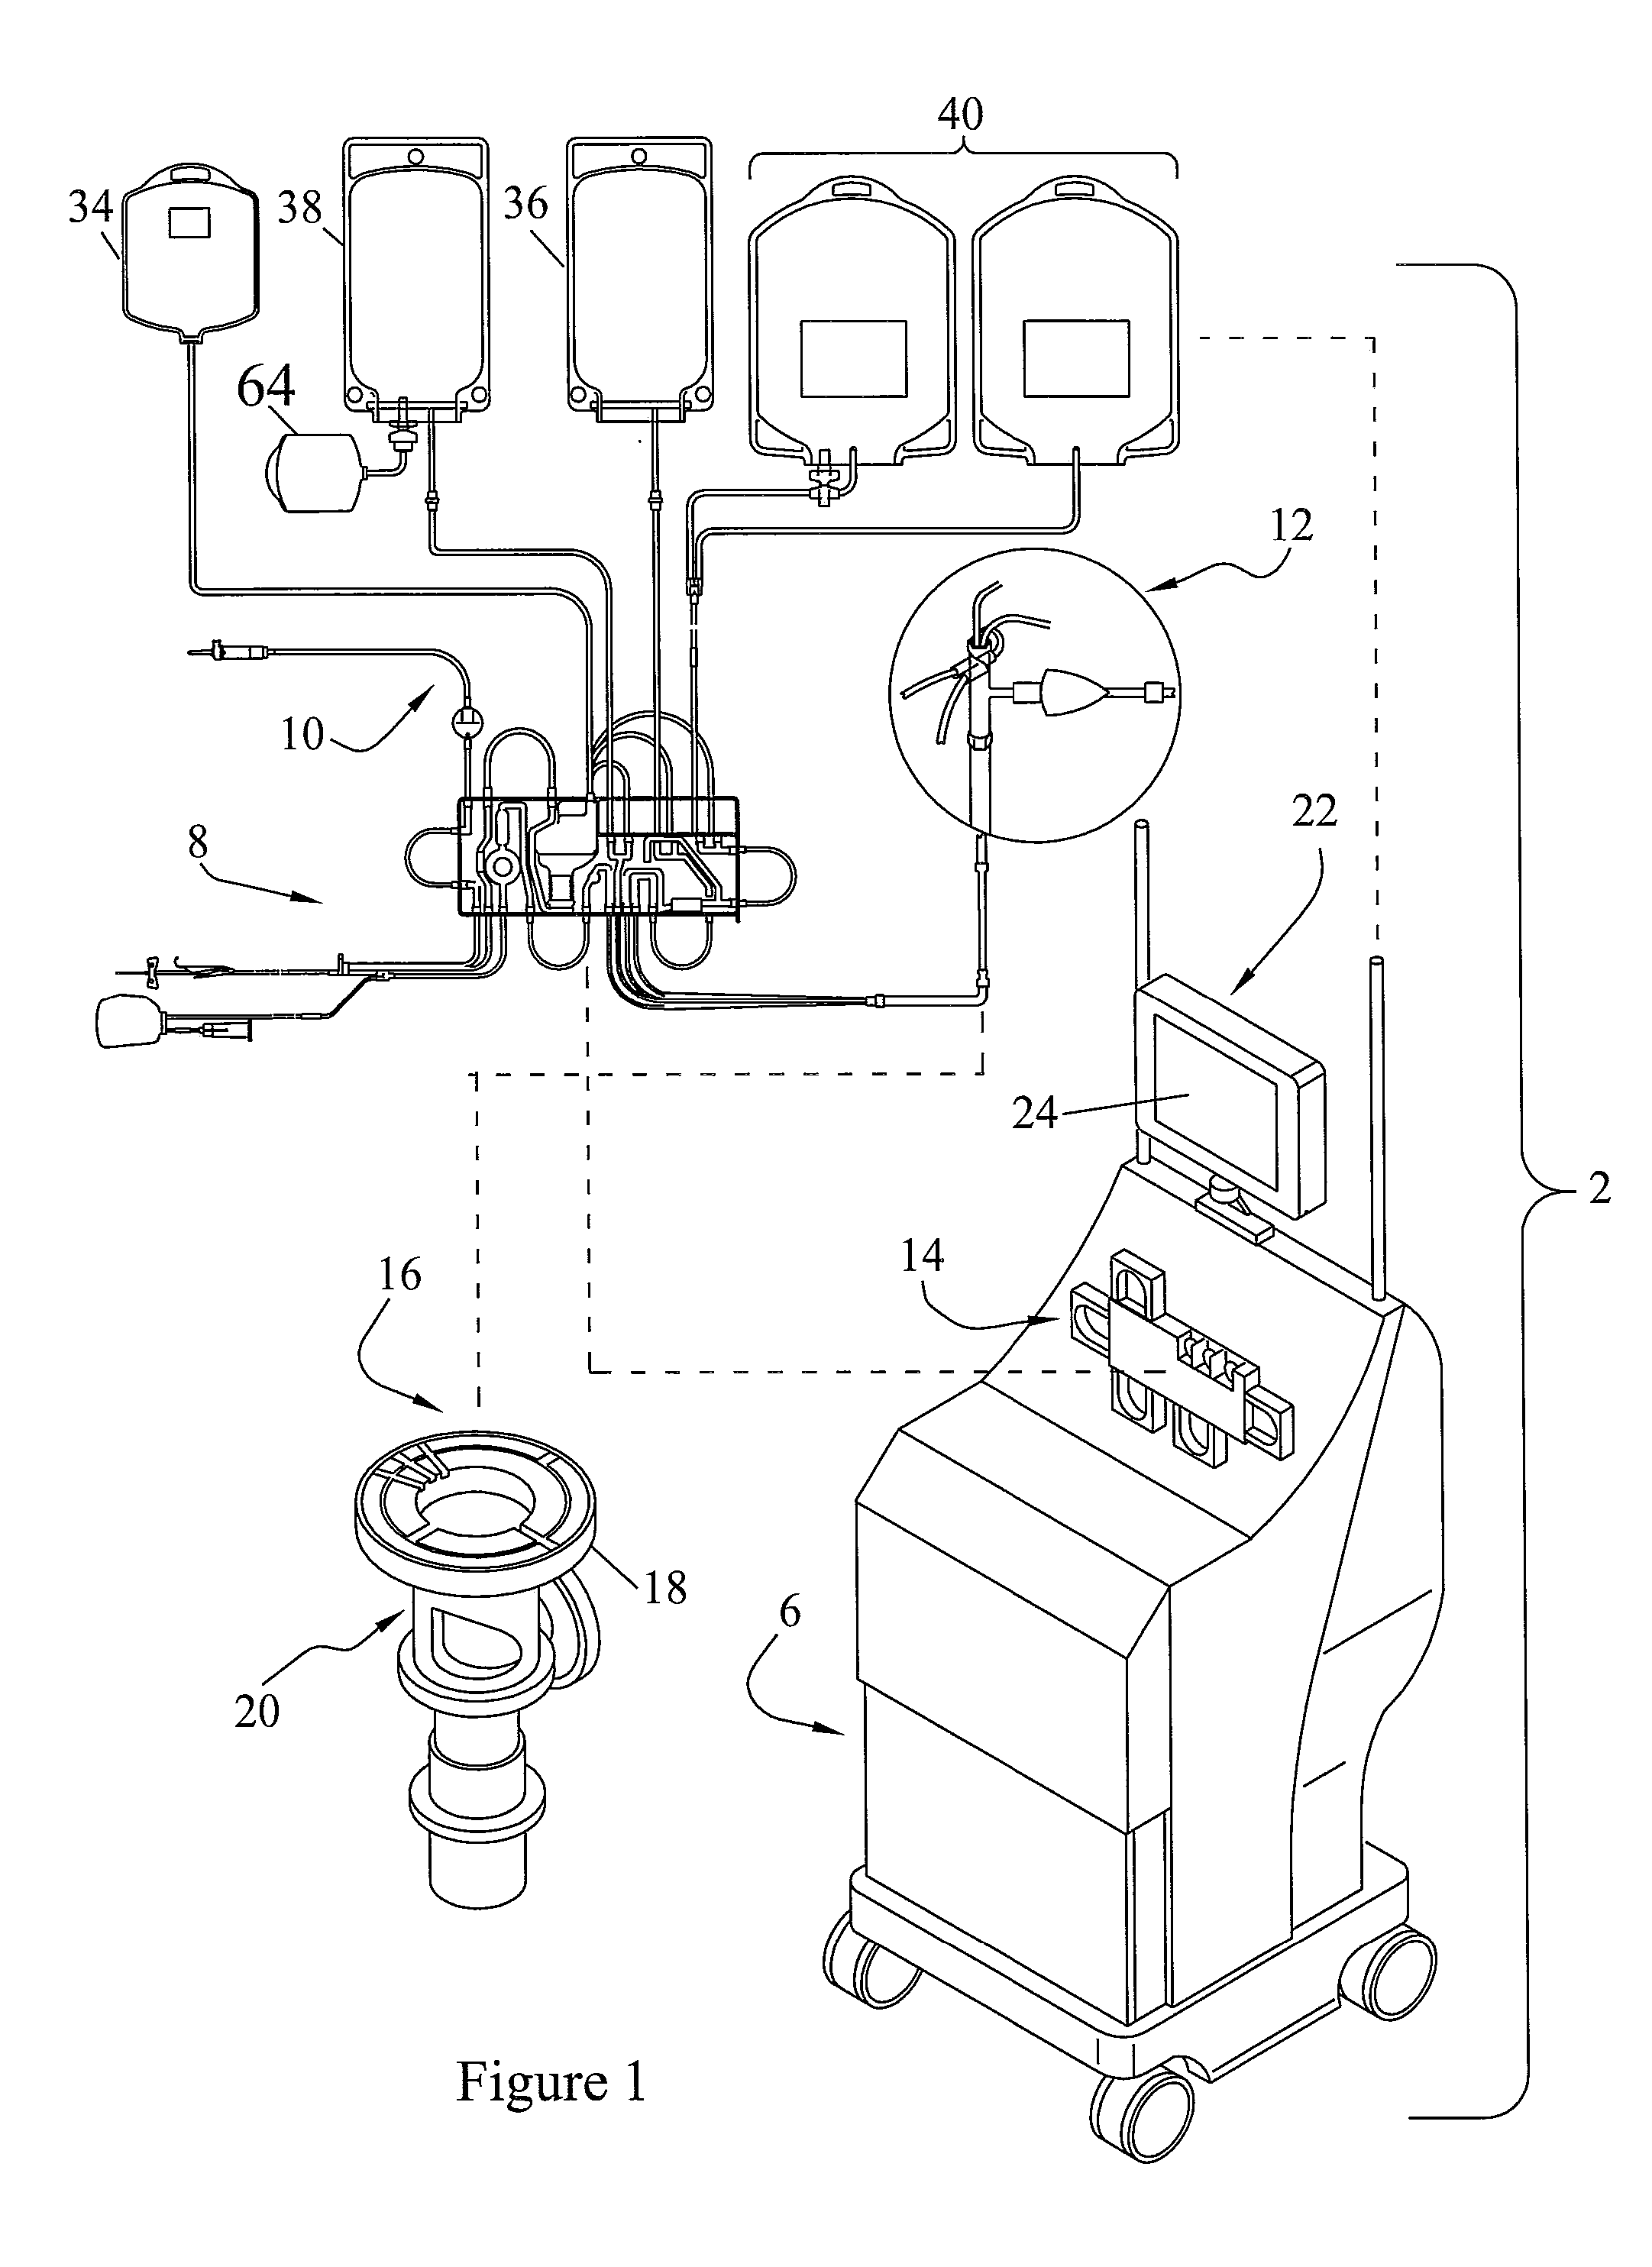 Methods and Apparatus for Hemolysis Detection in Centrifugal Blood Separator